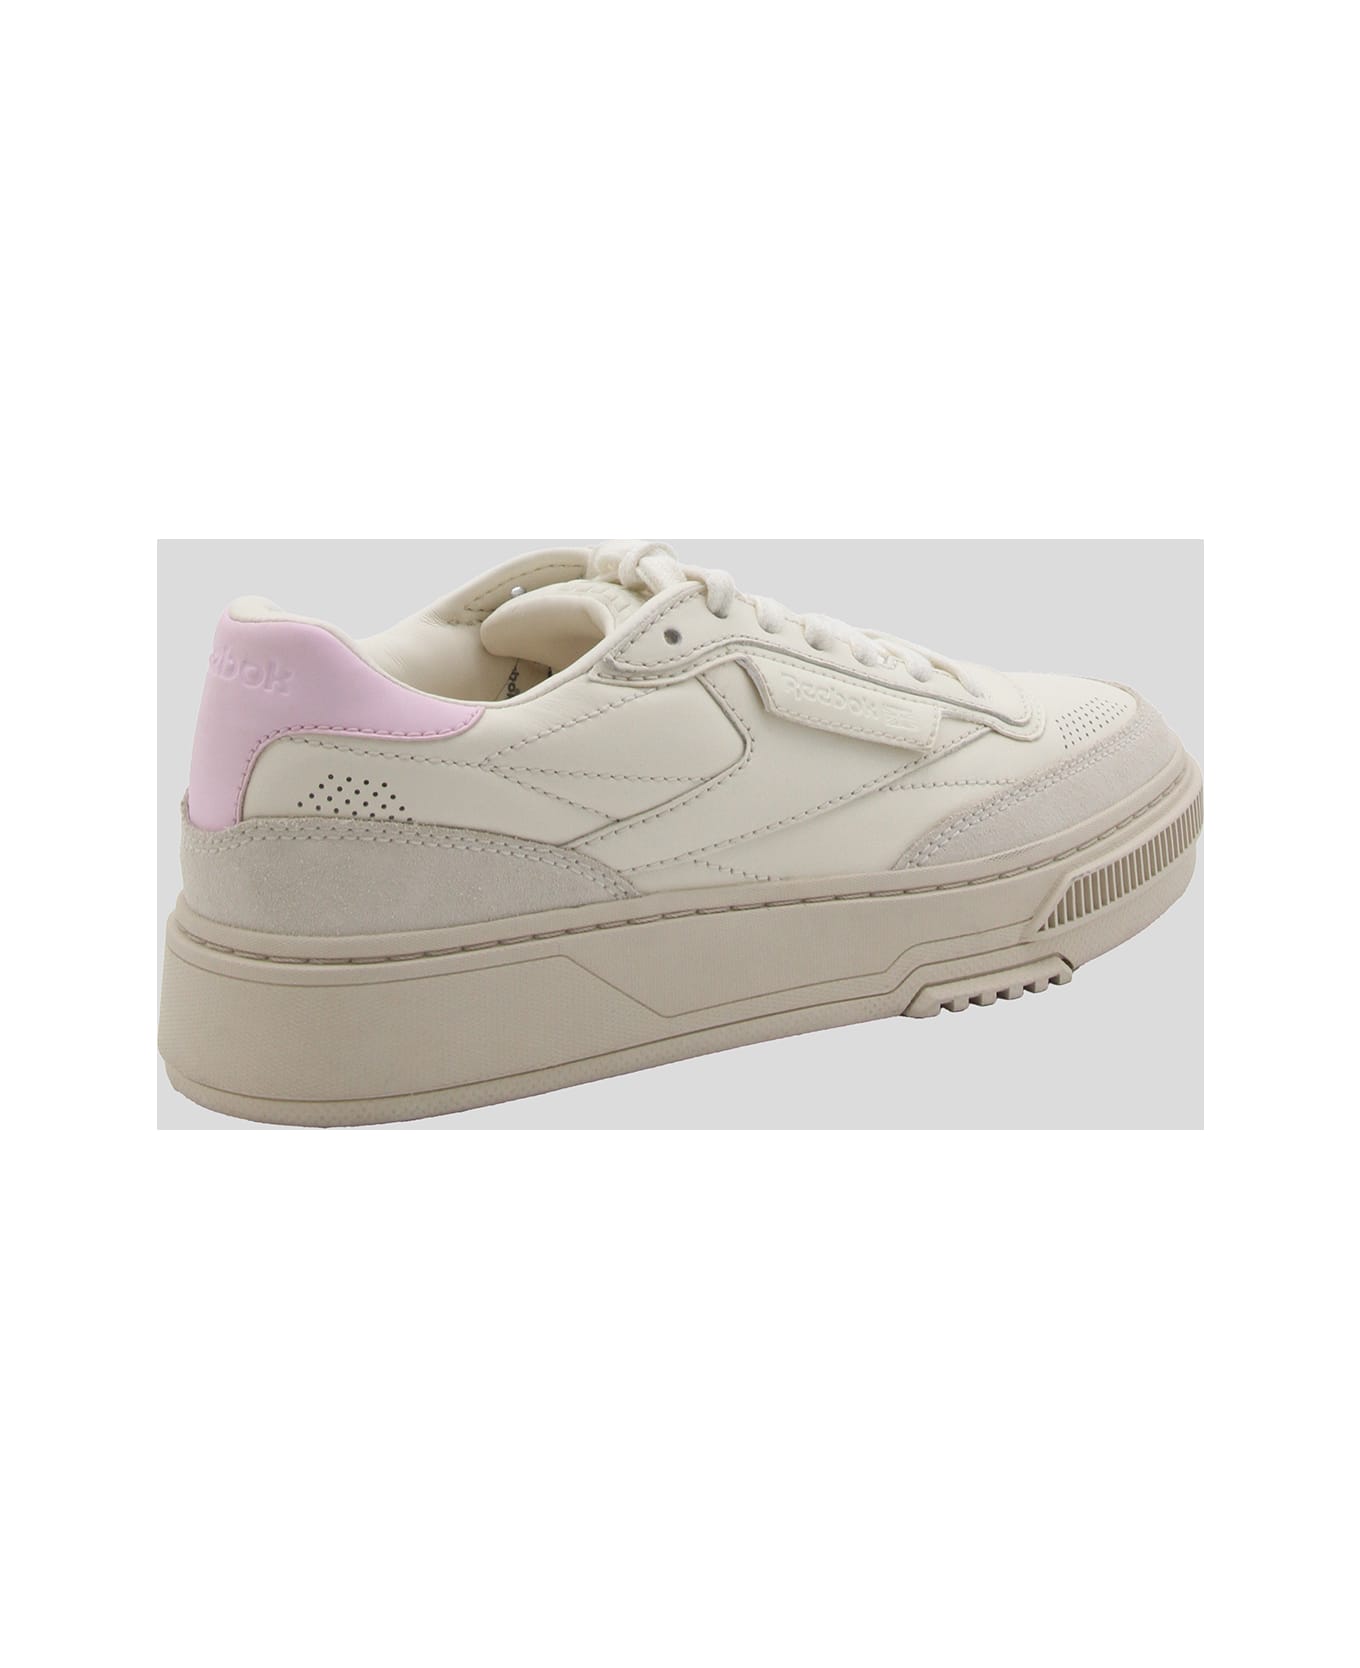 Reebok White And Pink Leather C Ltd Sneakers - Light pink